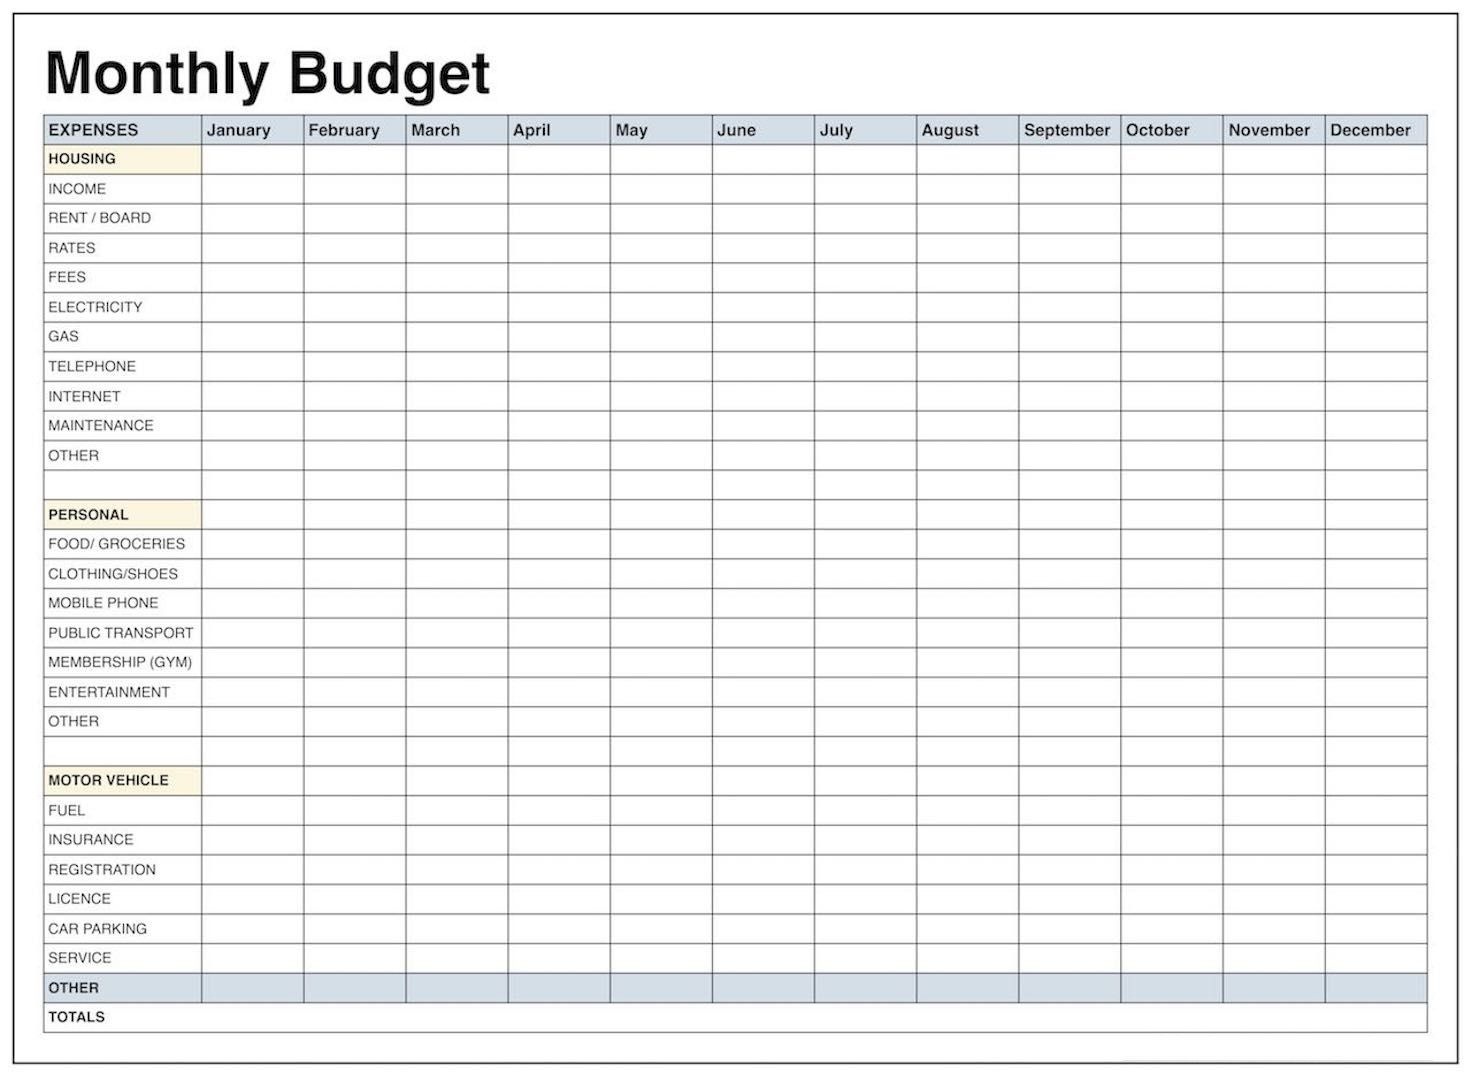 Blank Monthly Budget Template Pdf | Blank Templates | Budgeting - Free Printable Monthly Expense Sheet